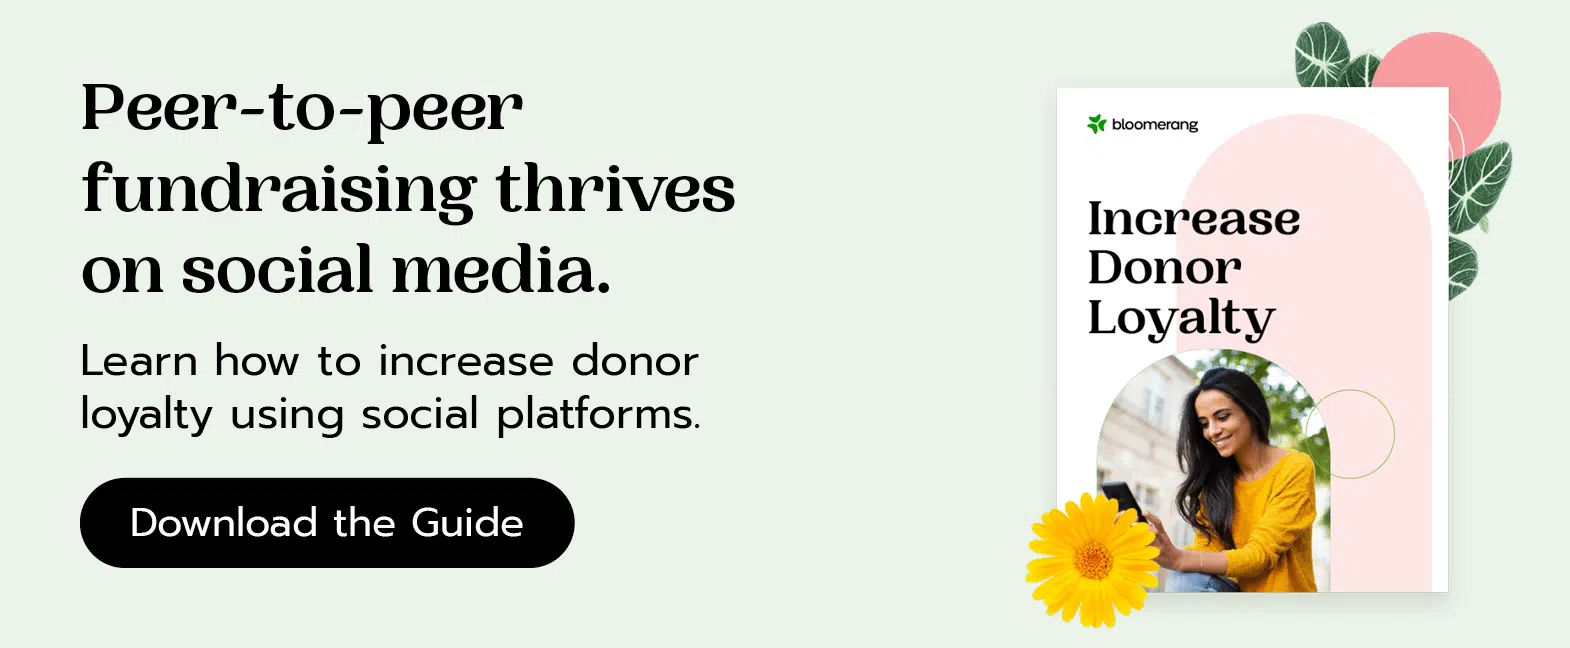 Peer-to-peer fundraising thrives on social media. Download our free guide to fostering donor loyalty using social media.